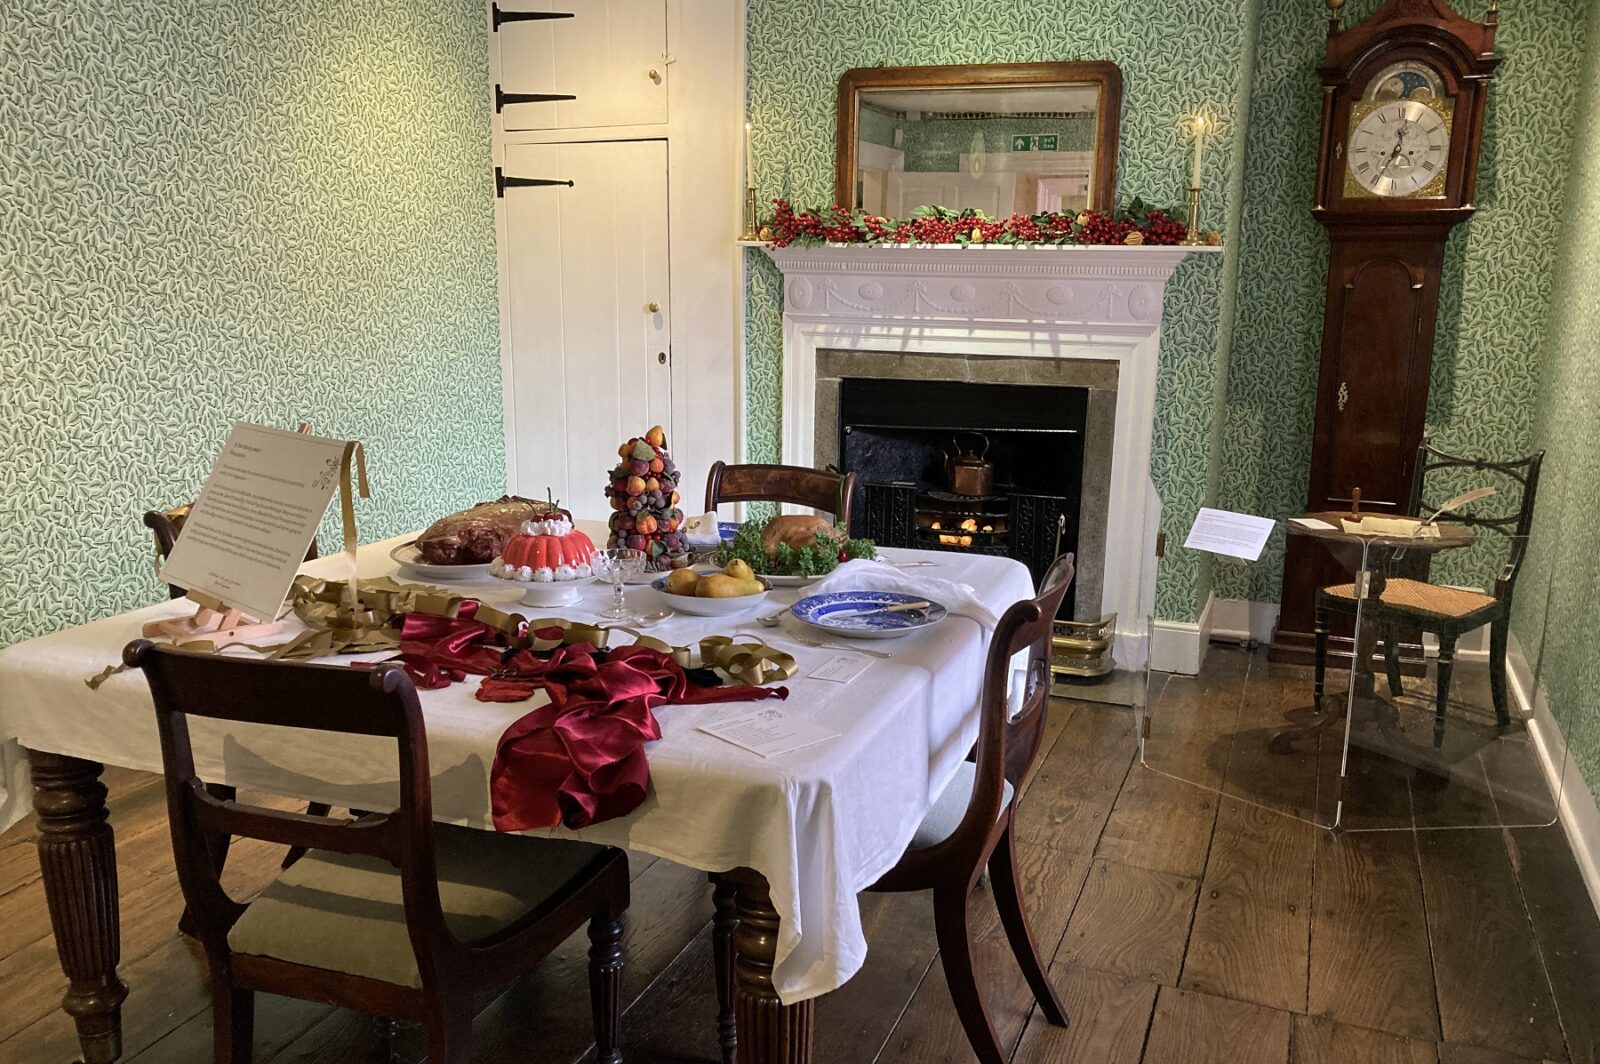 The Dining Room table is laid with 'cut up silk and gold paper' as well as a haunch of roast venison, roast partridge, a tower of fruits and a decorated jelly. Behind it, the fire crackles in the grate...